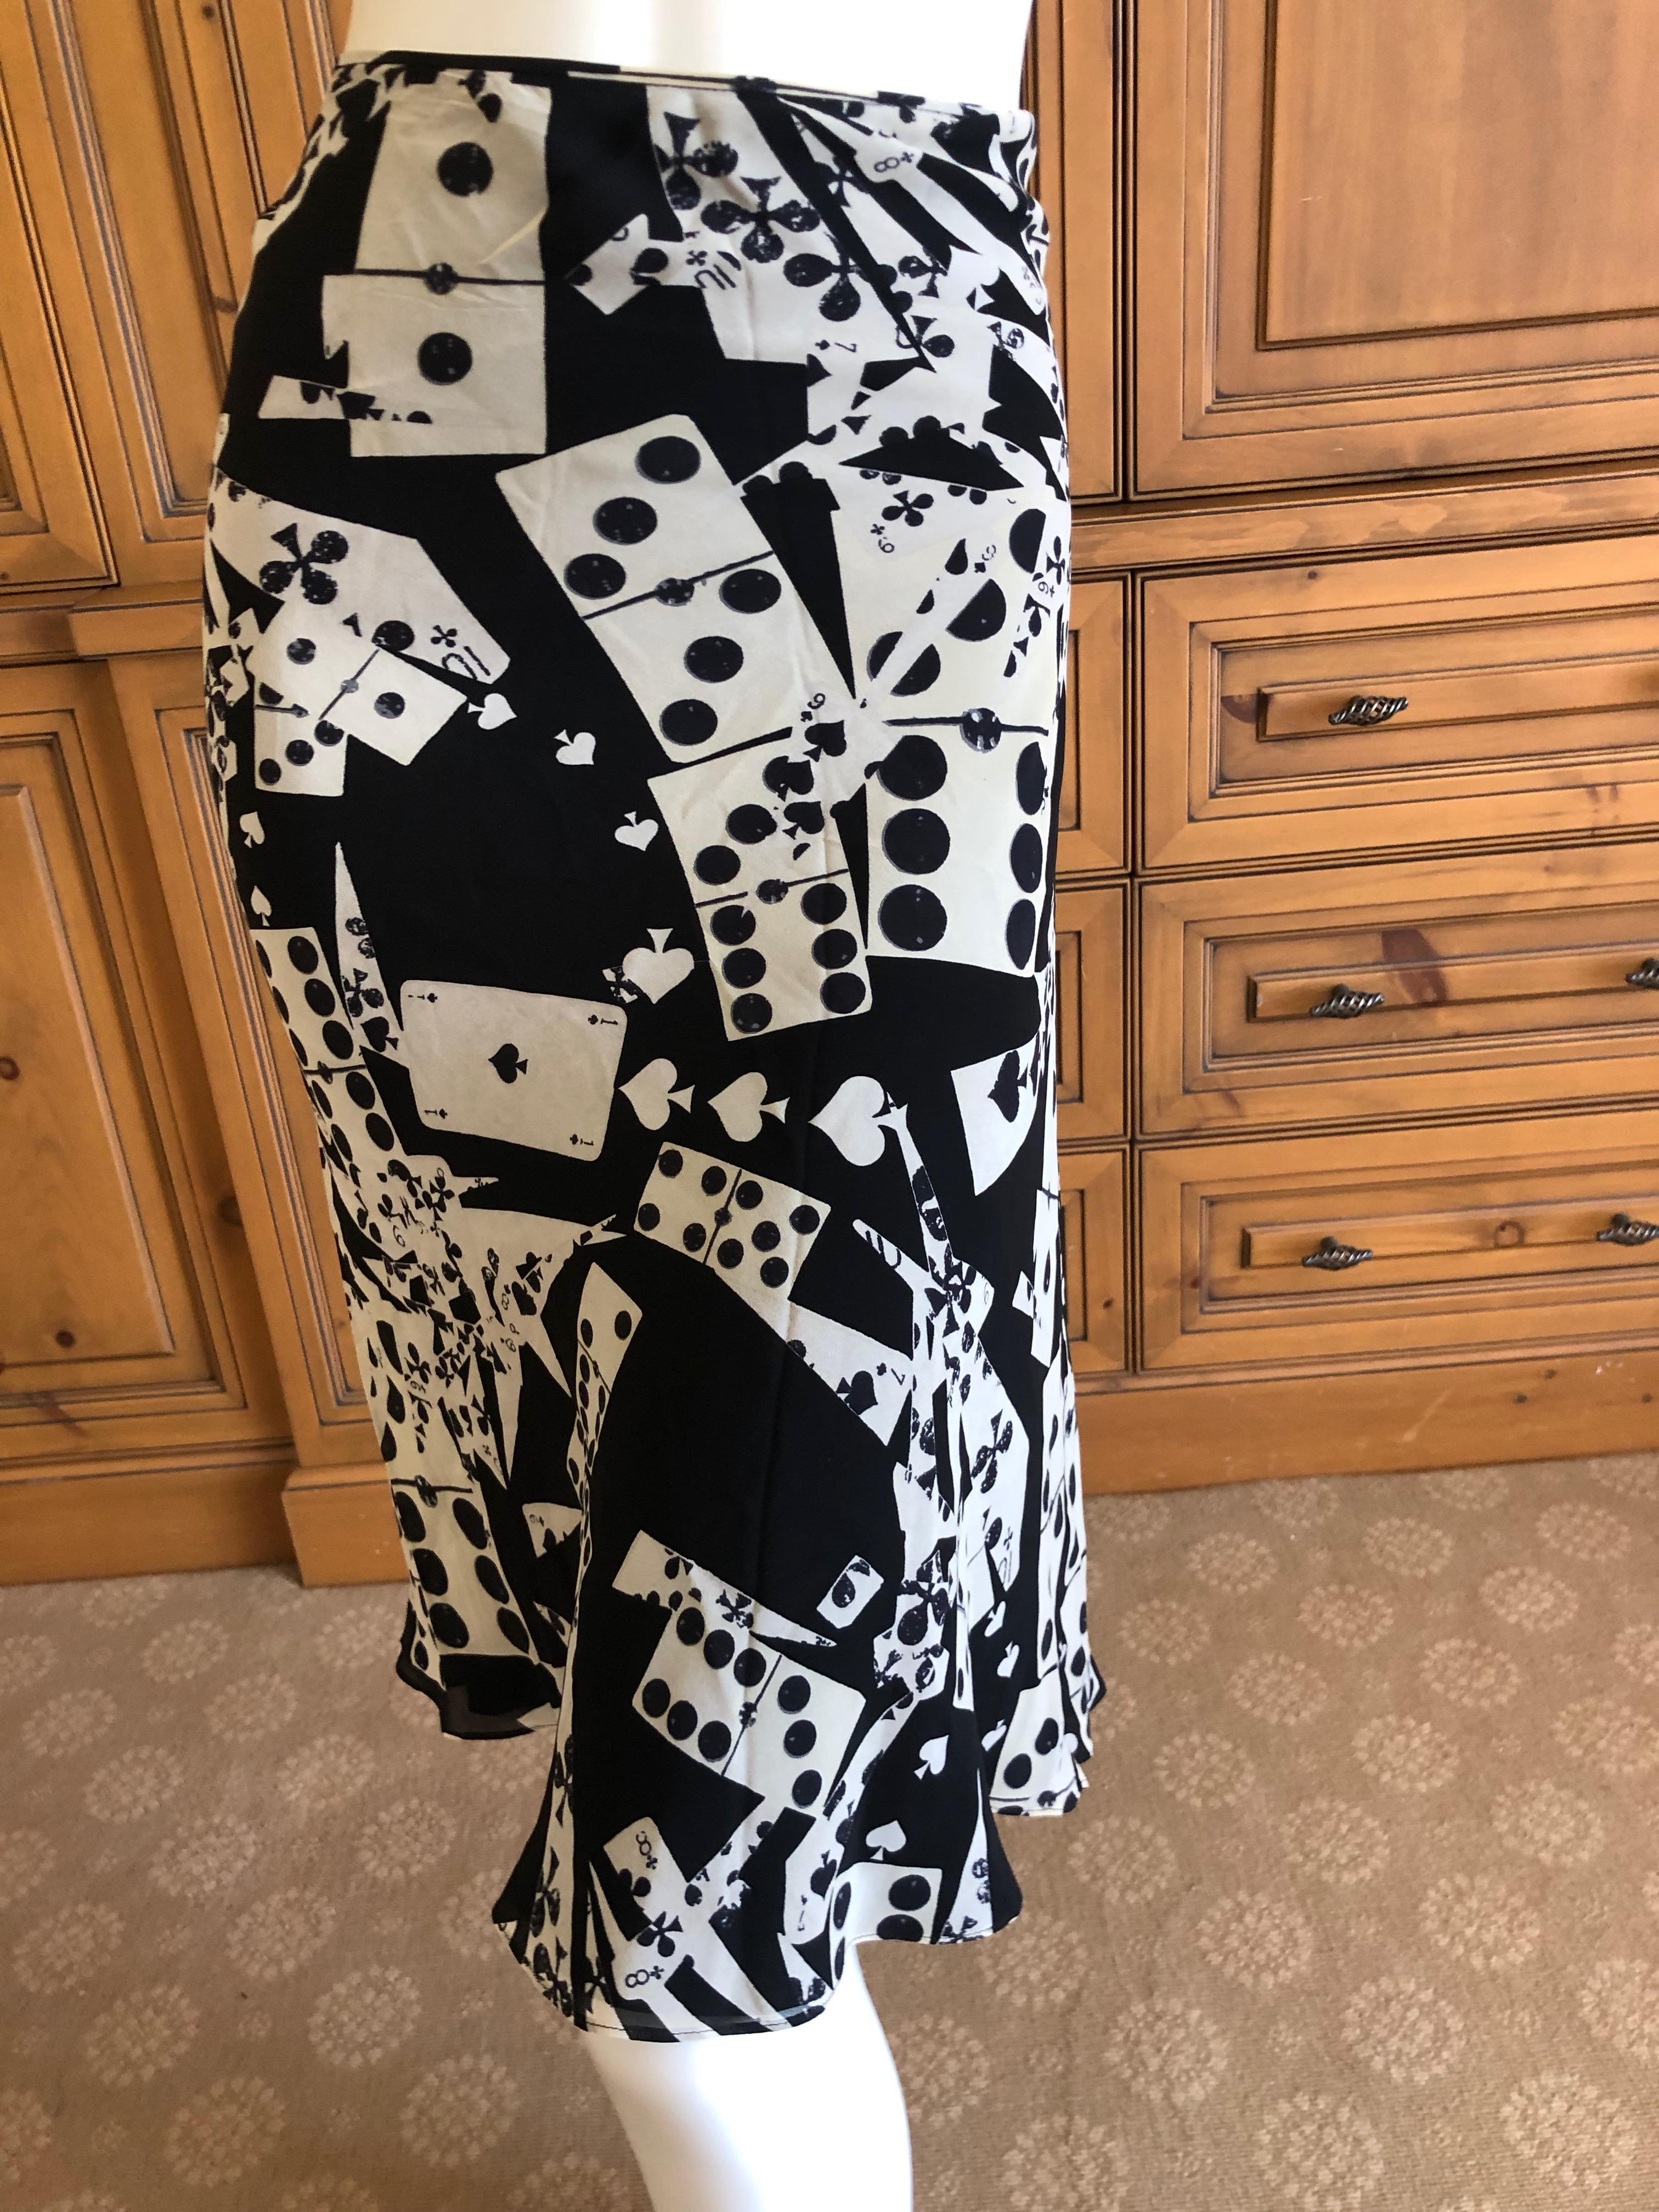 SquareTrade © AP6.0
Christian Dior John Galliano Playing Card and Domino Wrap Sweater and Matching Skirt. 
Sweater is silk cashmere wool blend, size 42, but as a wrap style it will fit many sizes.
Skirt is marked size 44
 Bust 36